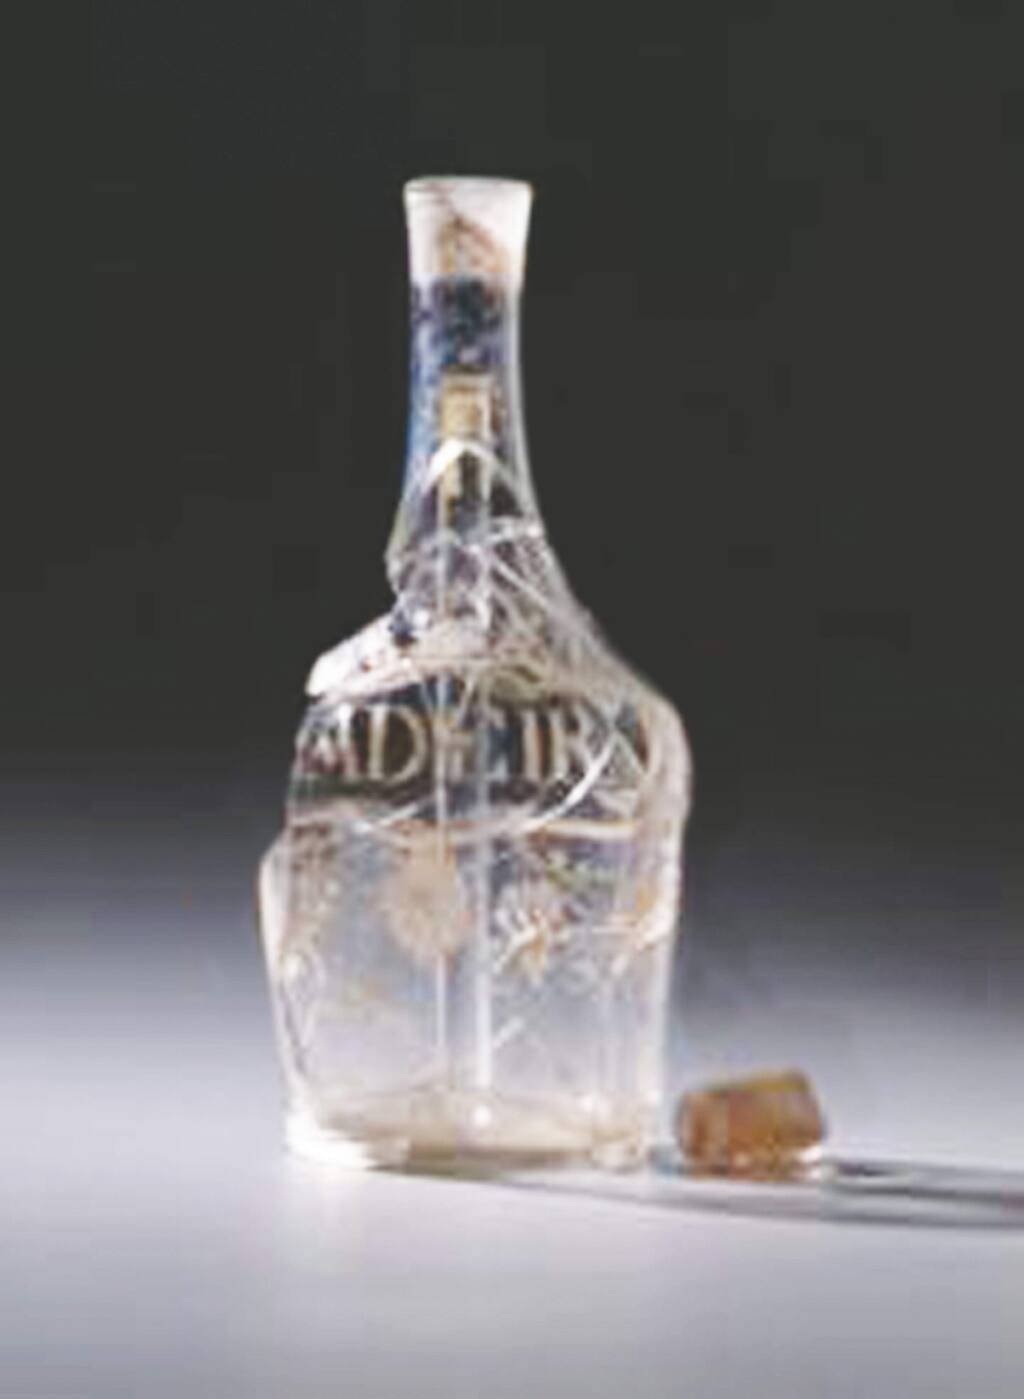 Madeira decanter excavated by archaeologists at Monticello. (monticello.org)